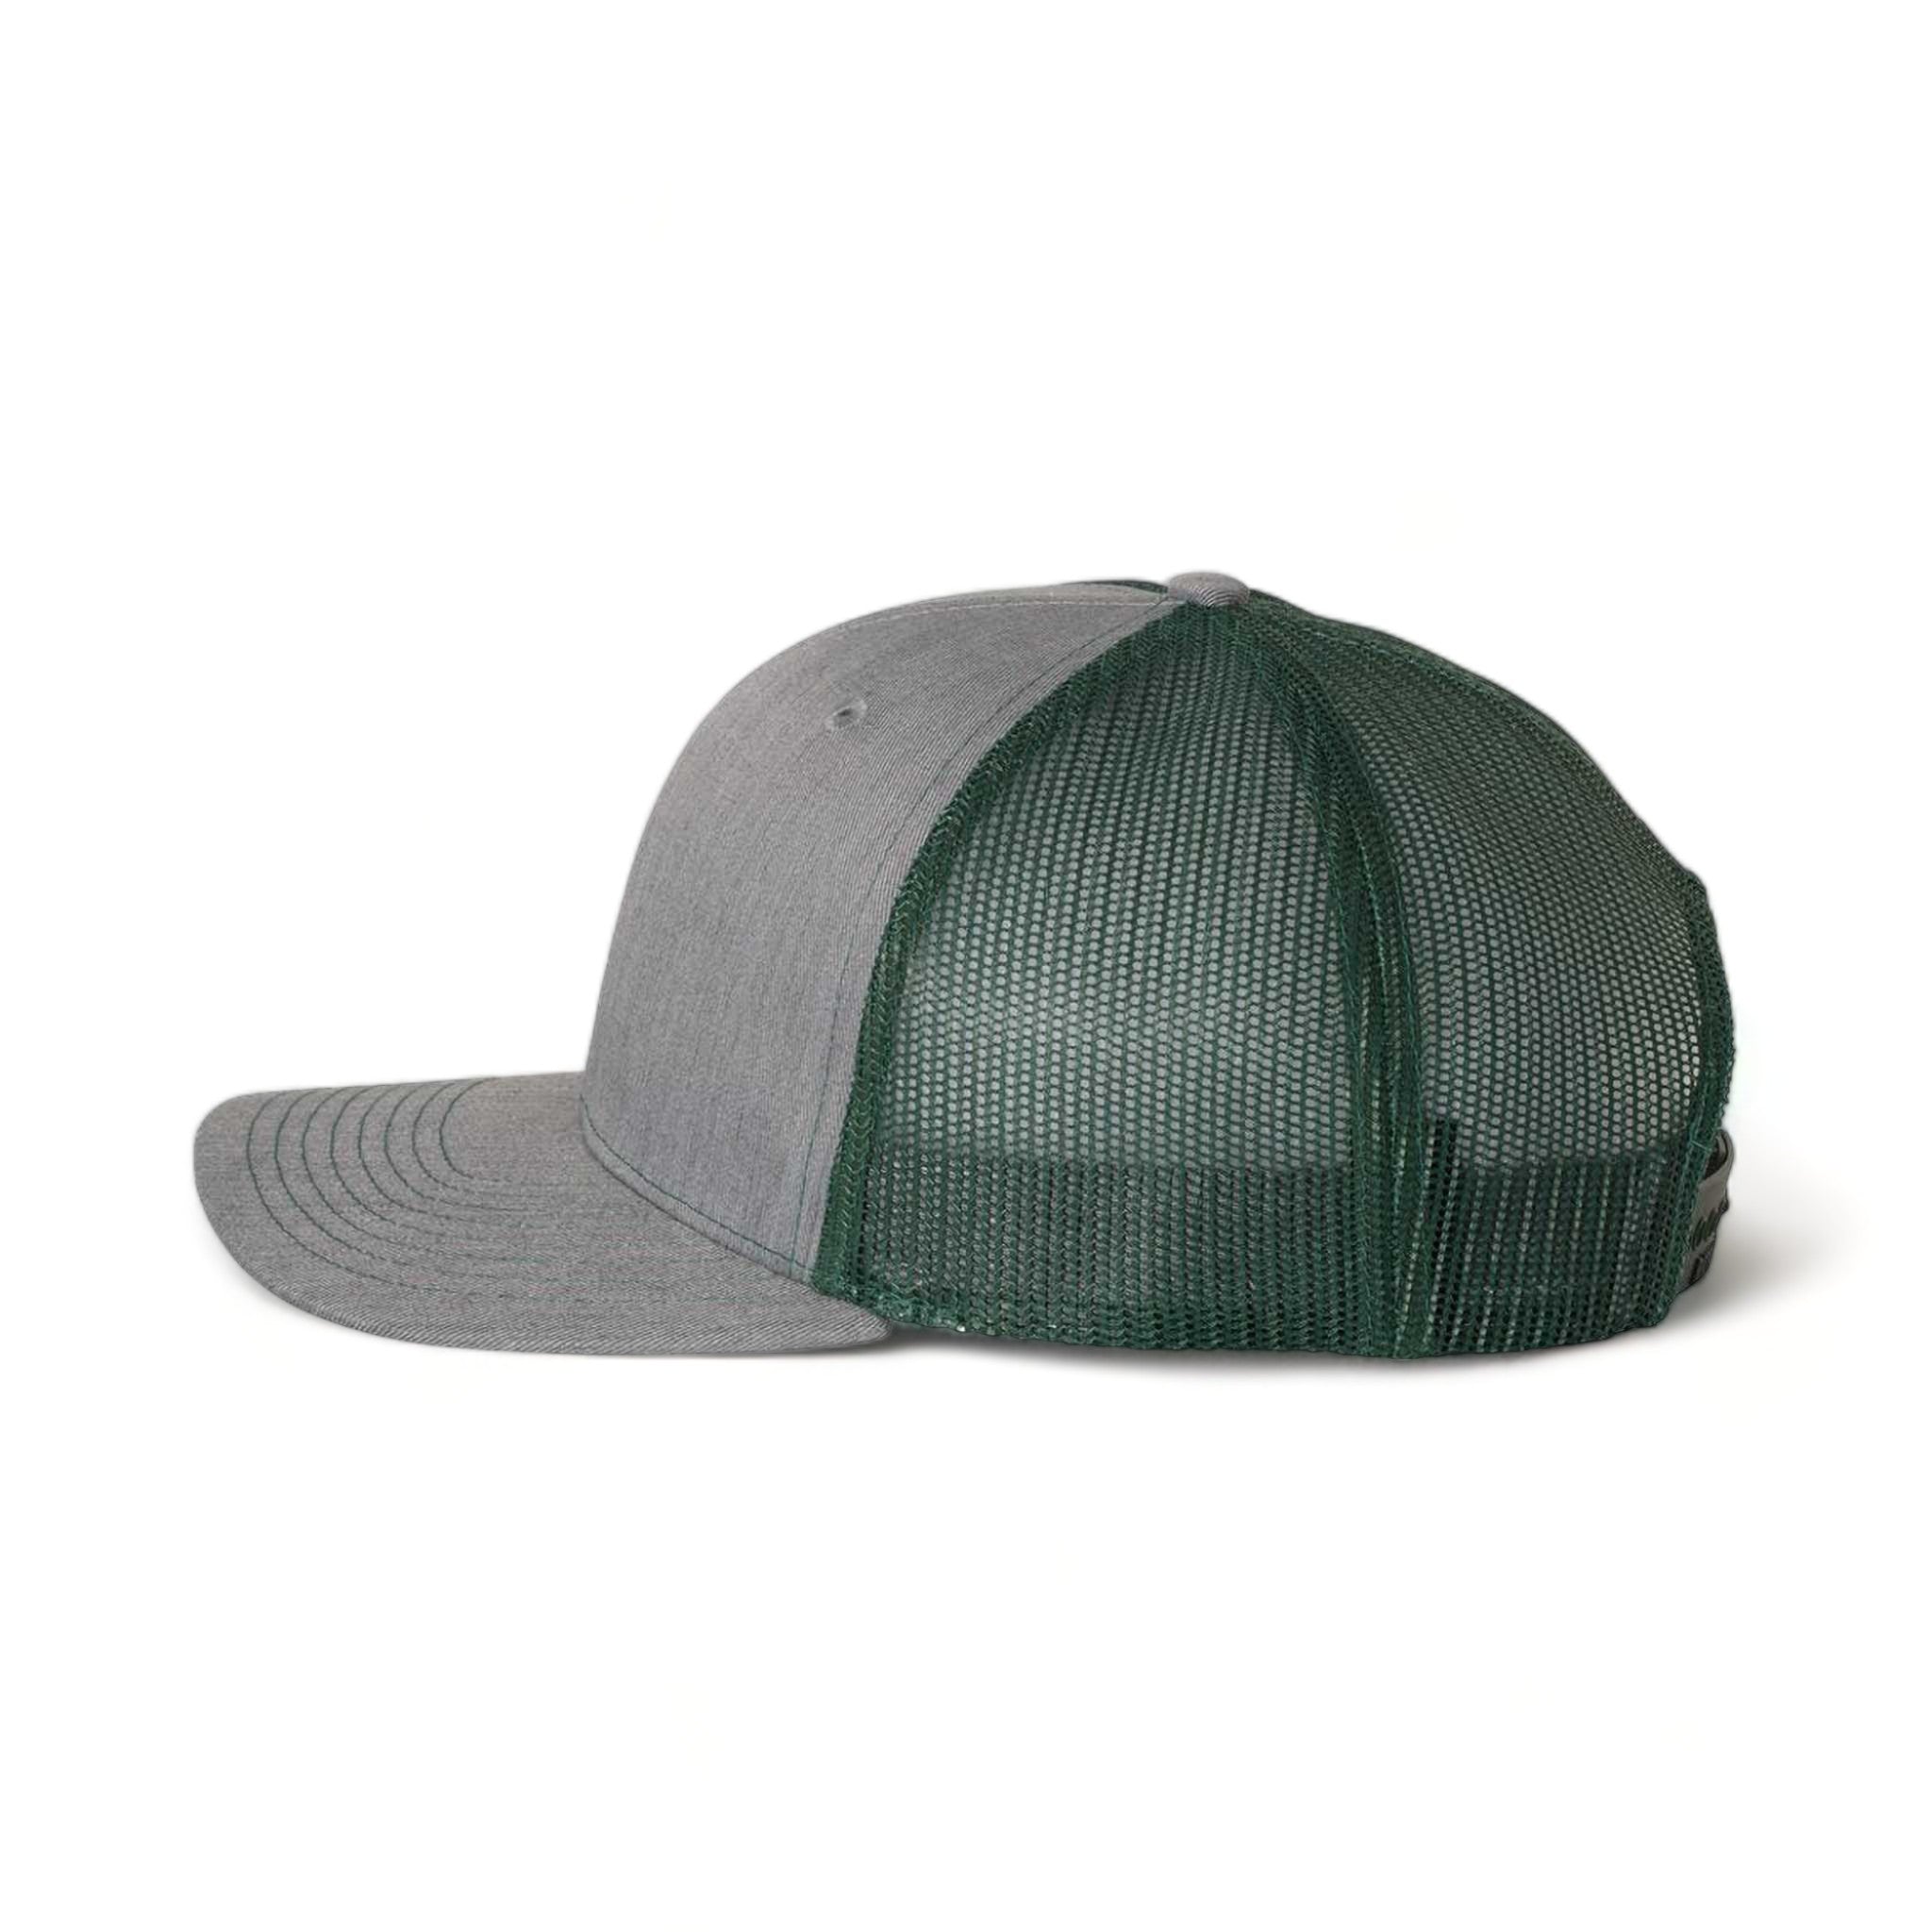 Side view of Richardson 112 custom hat in heather grey and dark green